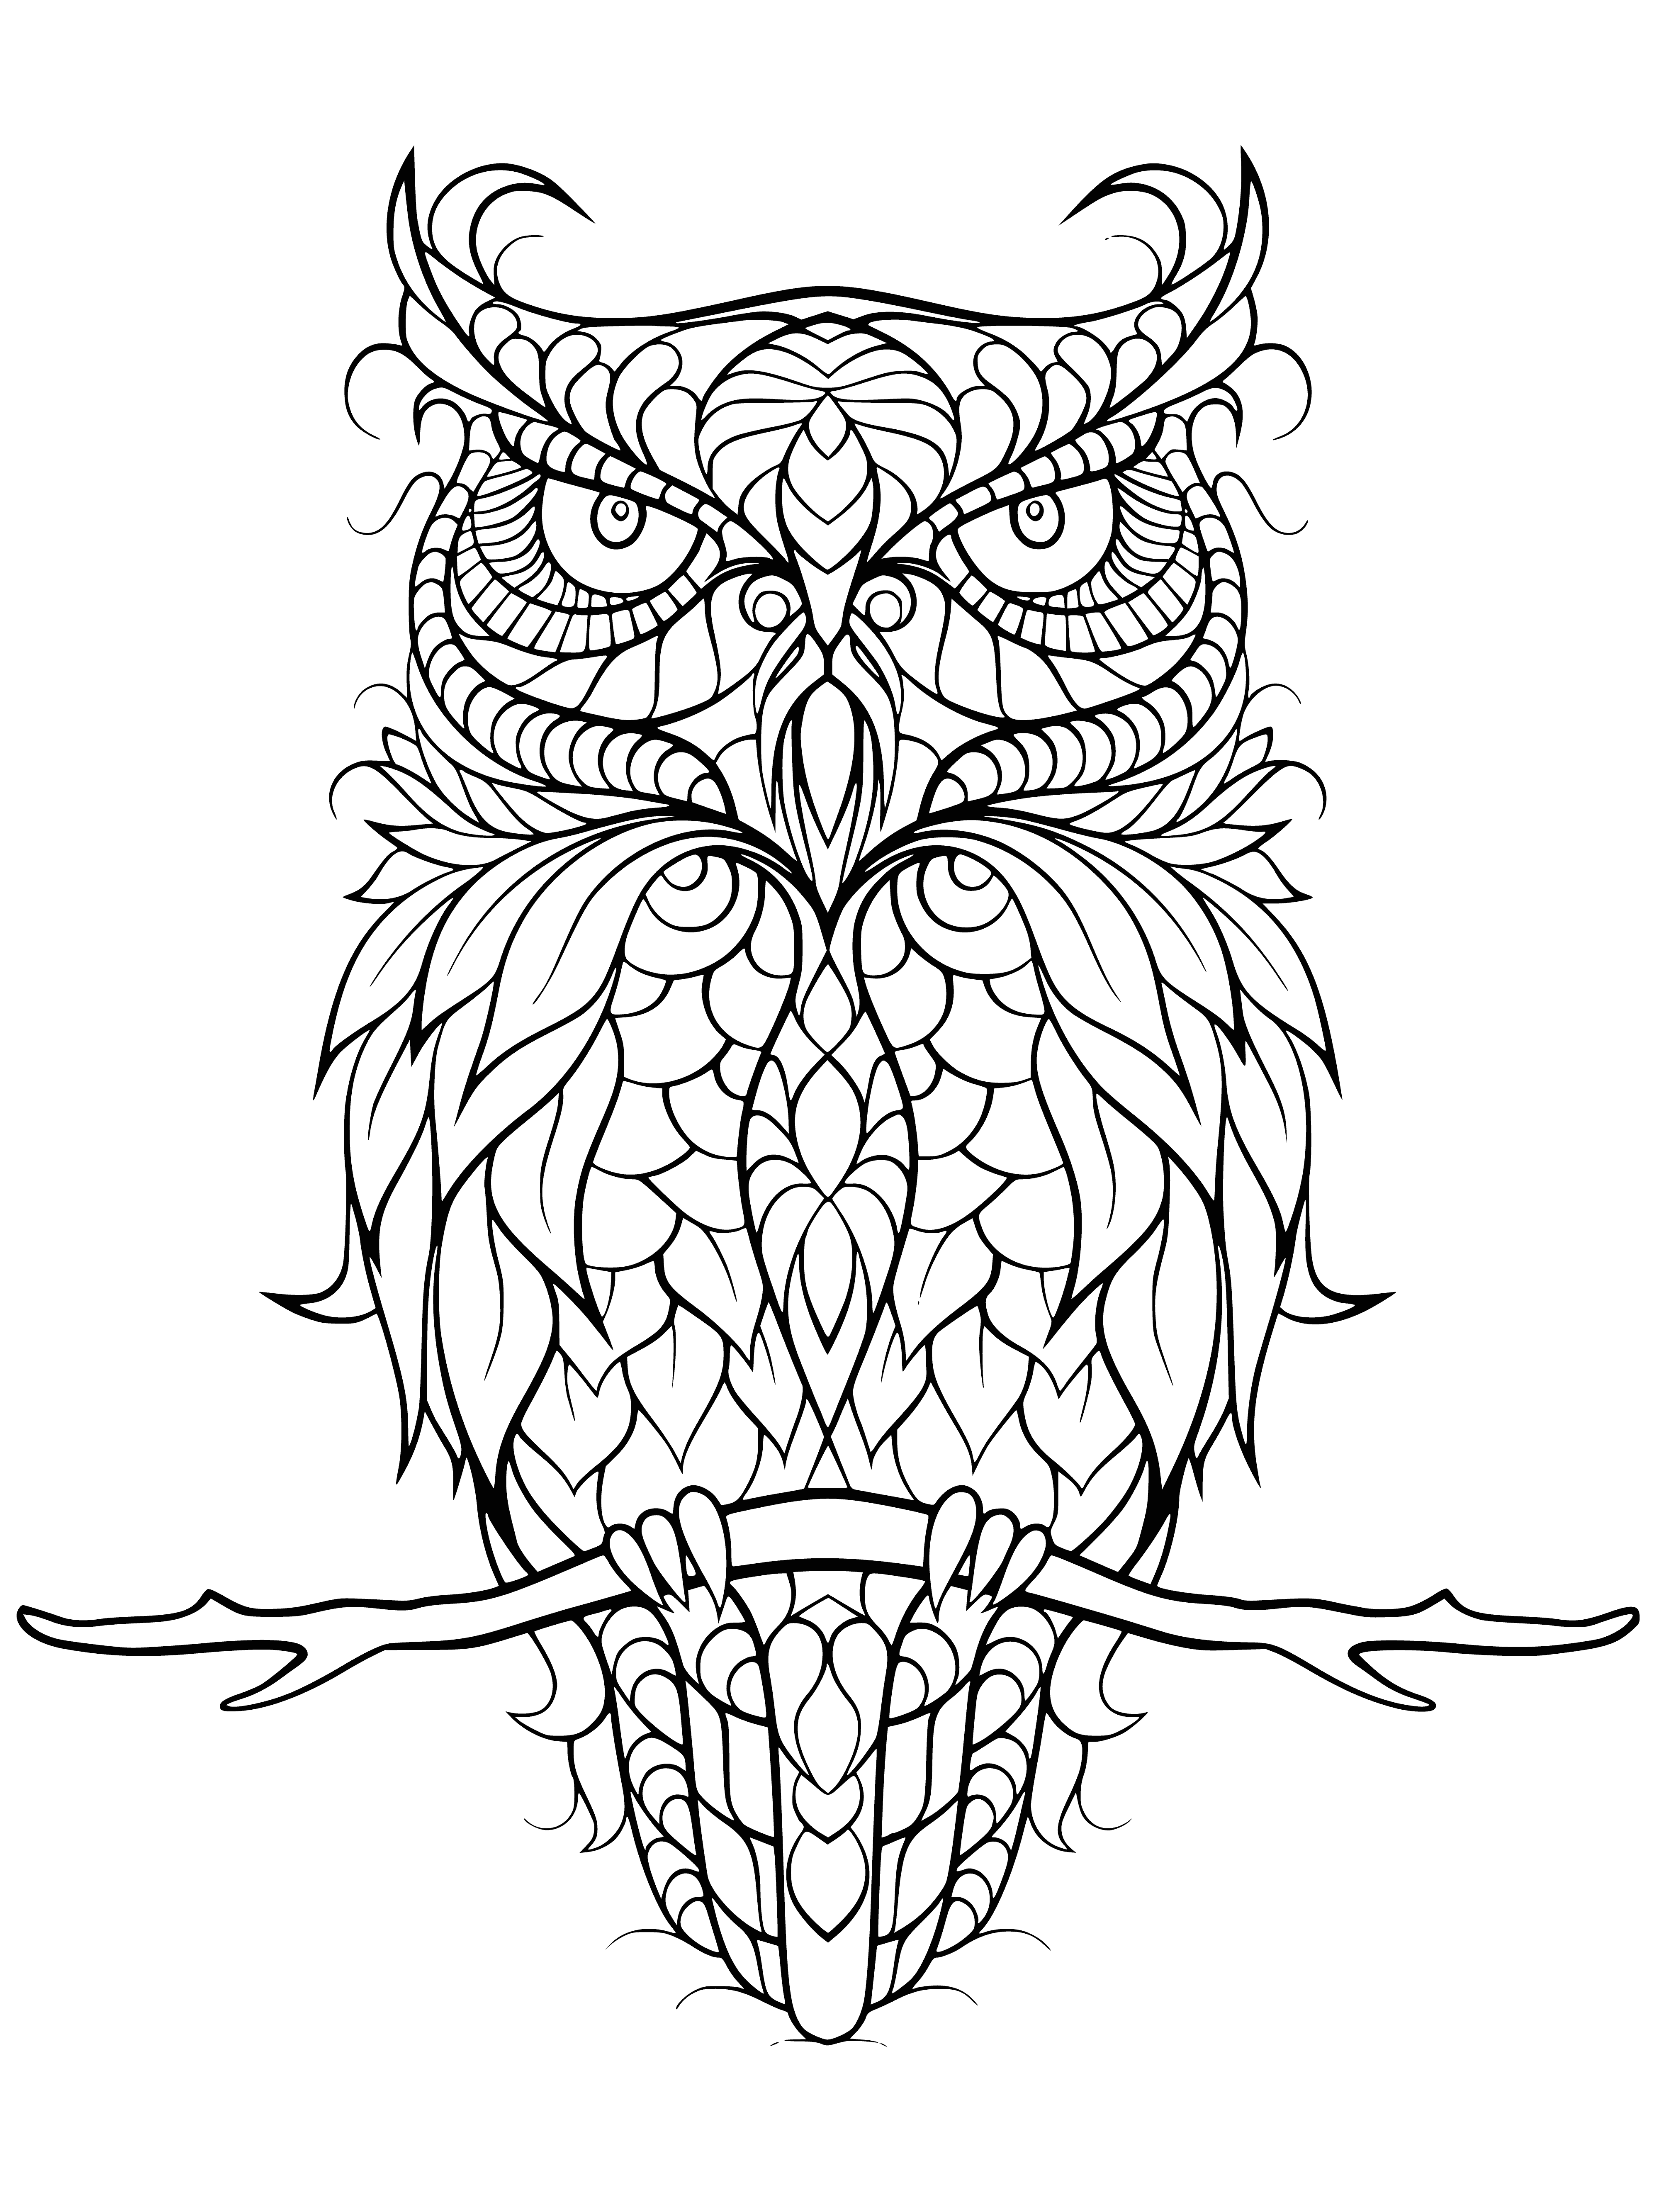 coloring page: A large owl, perched on a tree with ruffled feathers, looks wise and calming with its bright eyes and pointy ears.